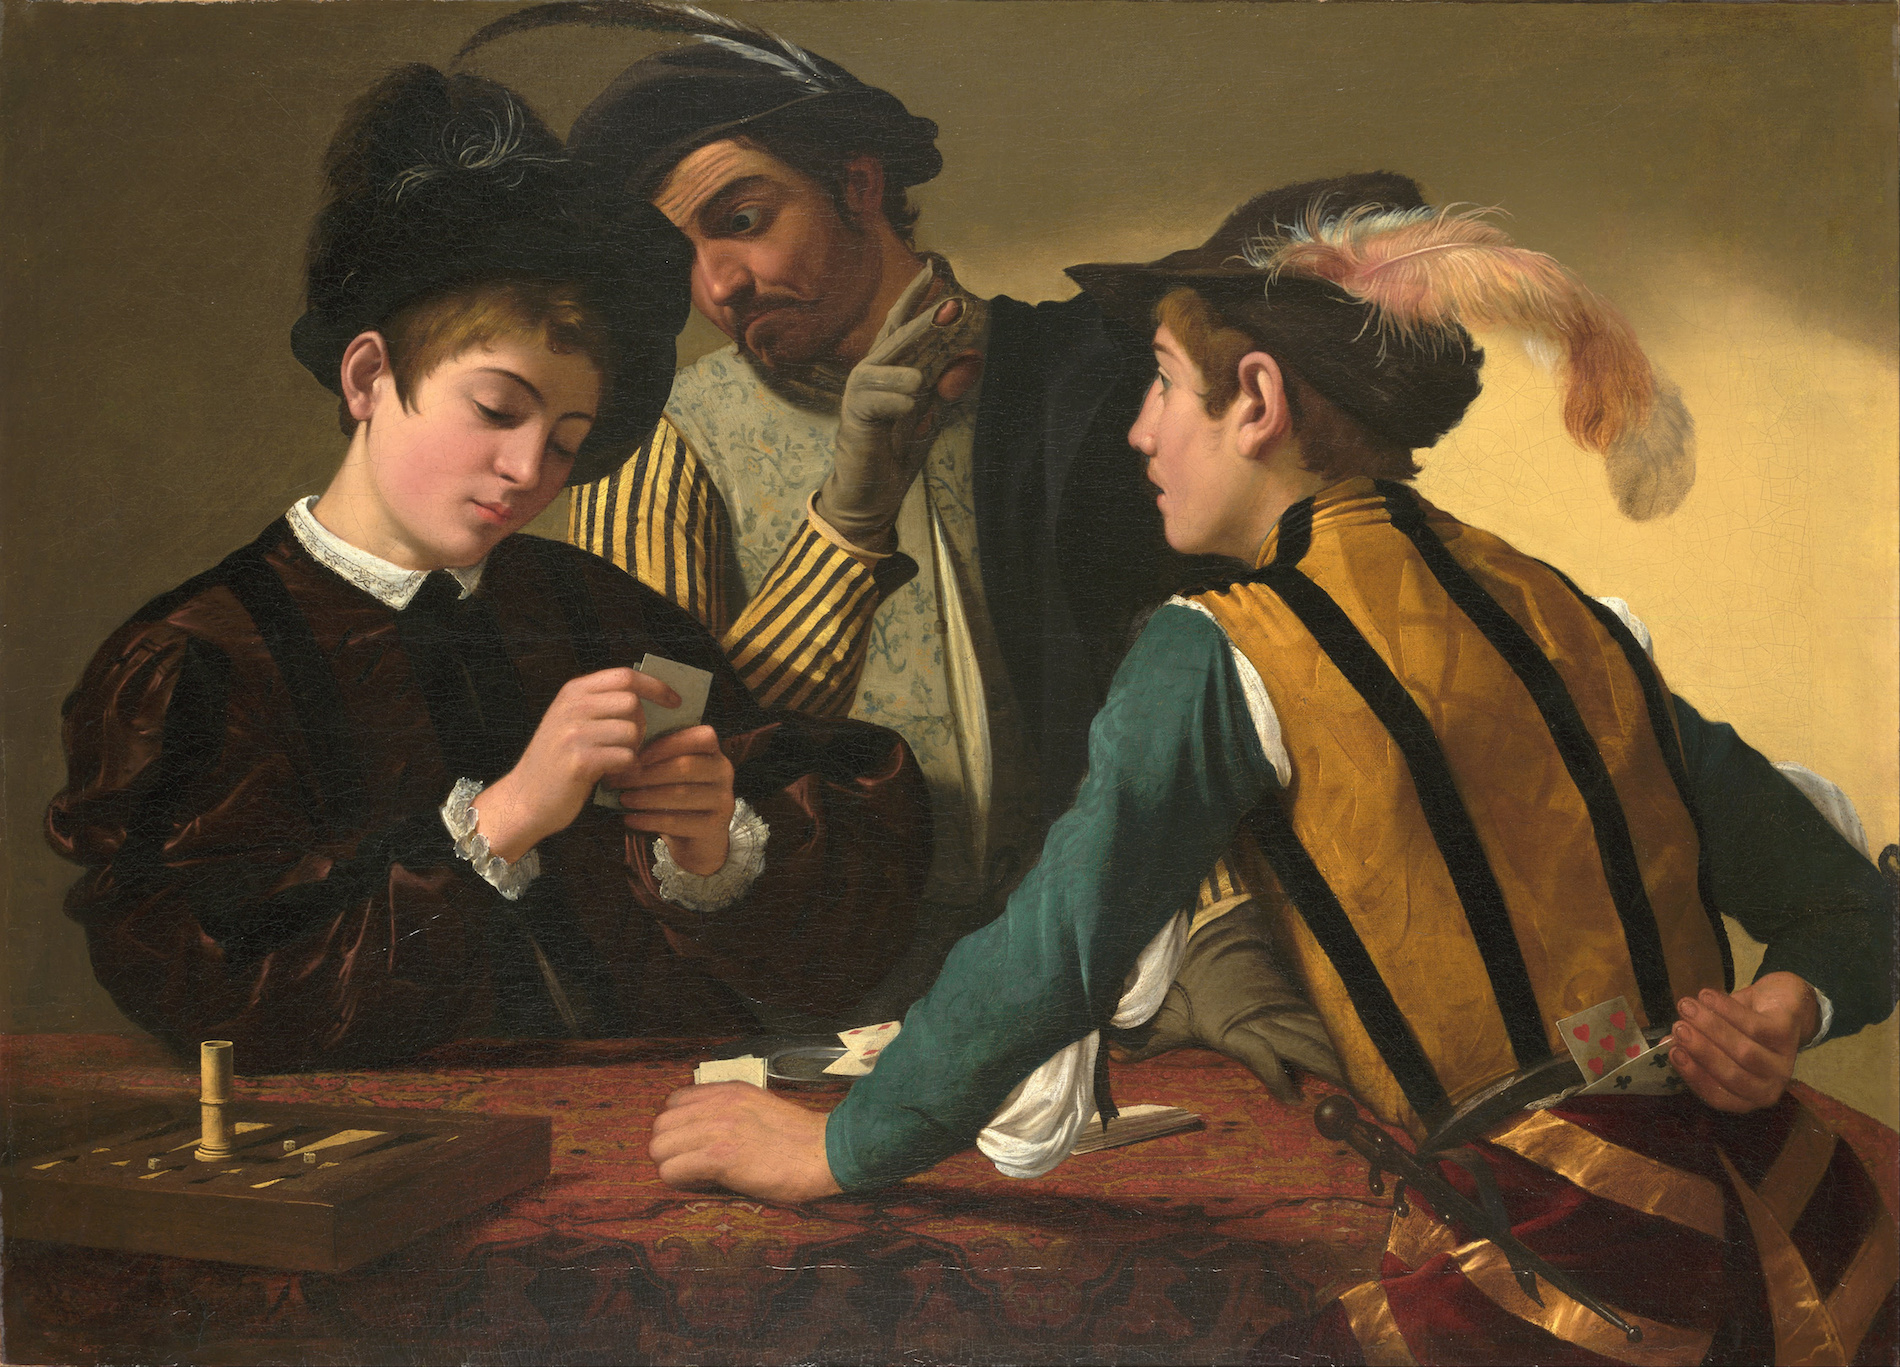 Os Trapaceiros by  Caravaggio - c. 1595 Kimbell Art Museum